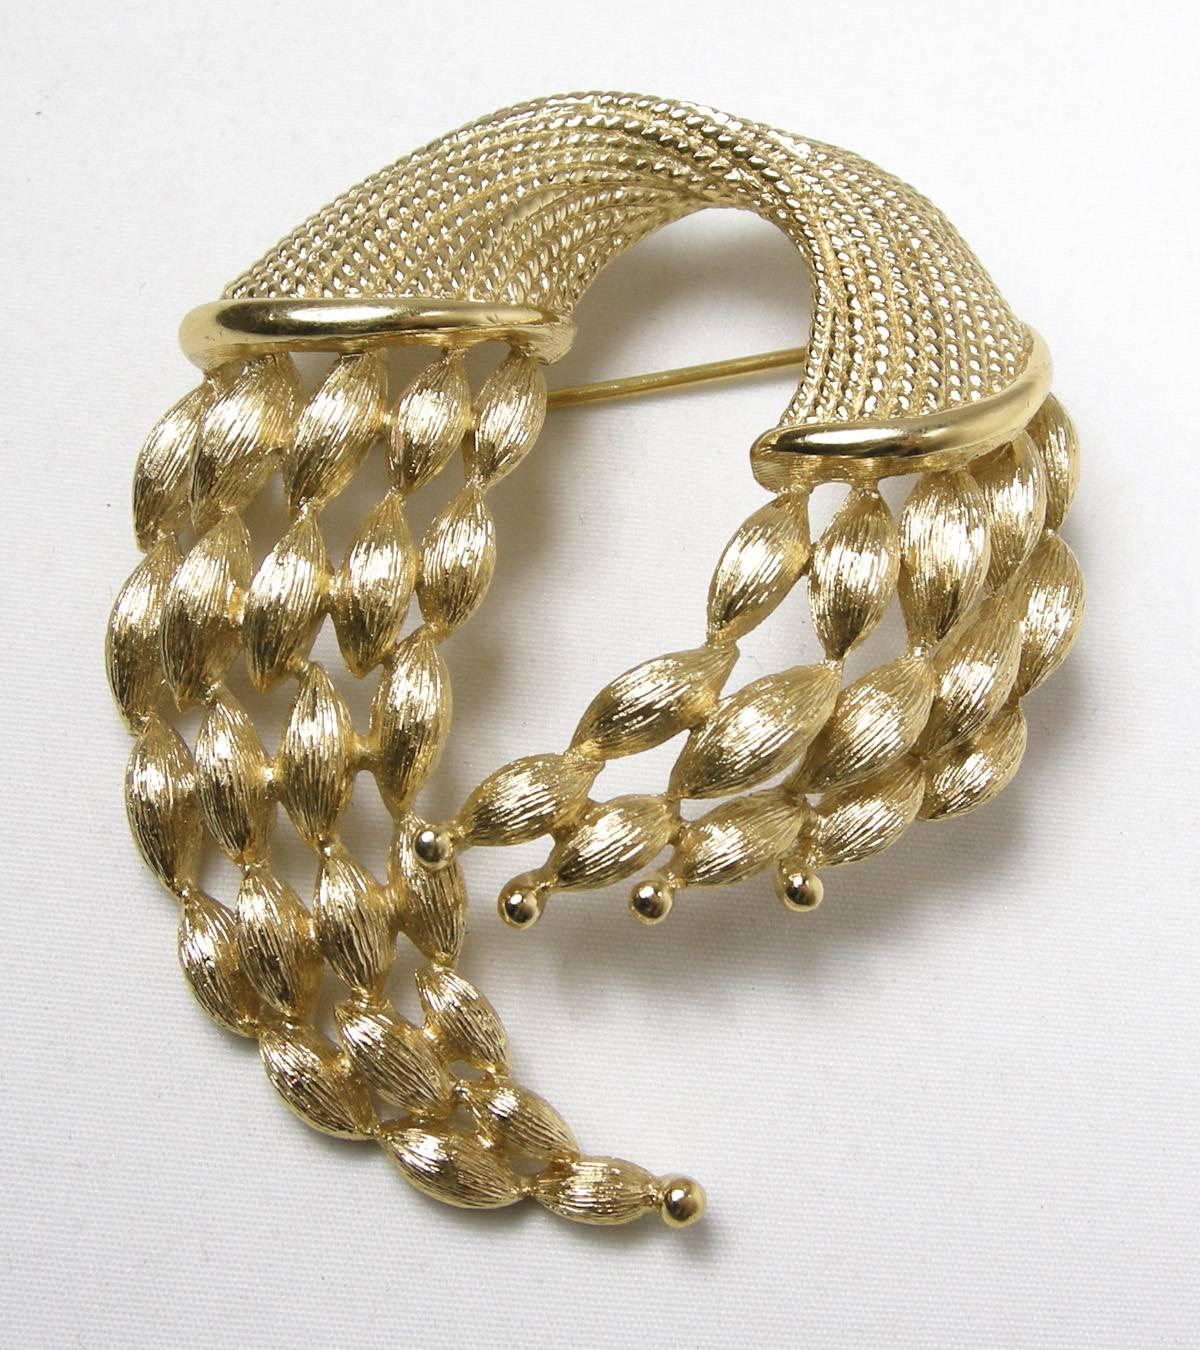 This Monet brooch has a slightly domed golden twist rope design and measures 2-1/2” x 2-1/4”.  The earrings are round button earrings with a ribbed design. They measure 1” x 1”. This set is signed “Monet” and is in excellent condition.